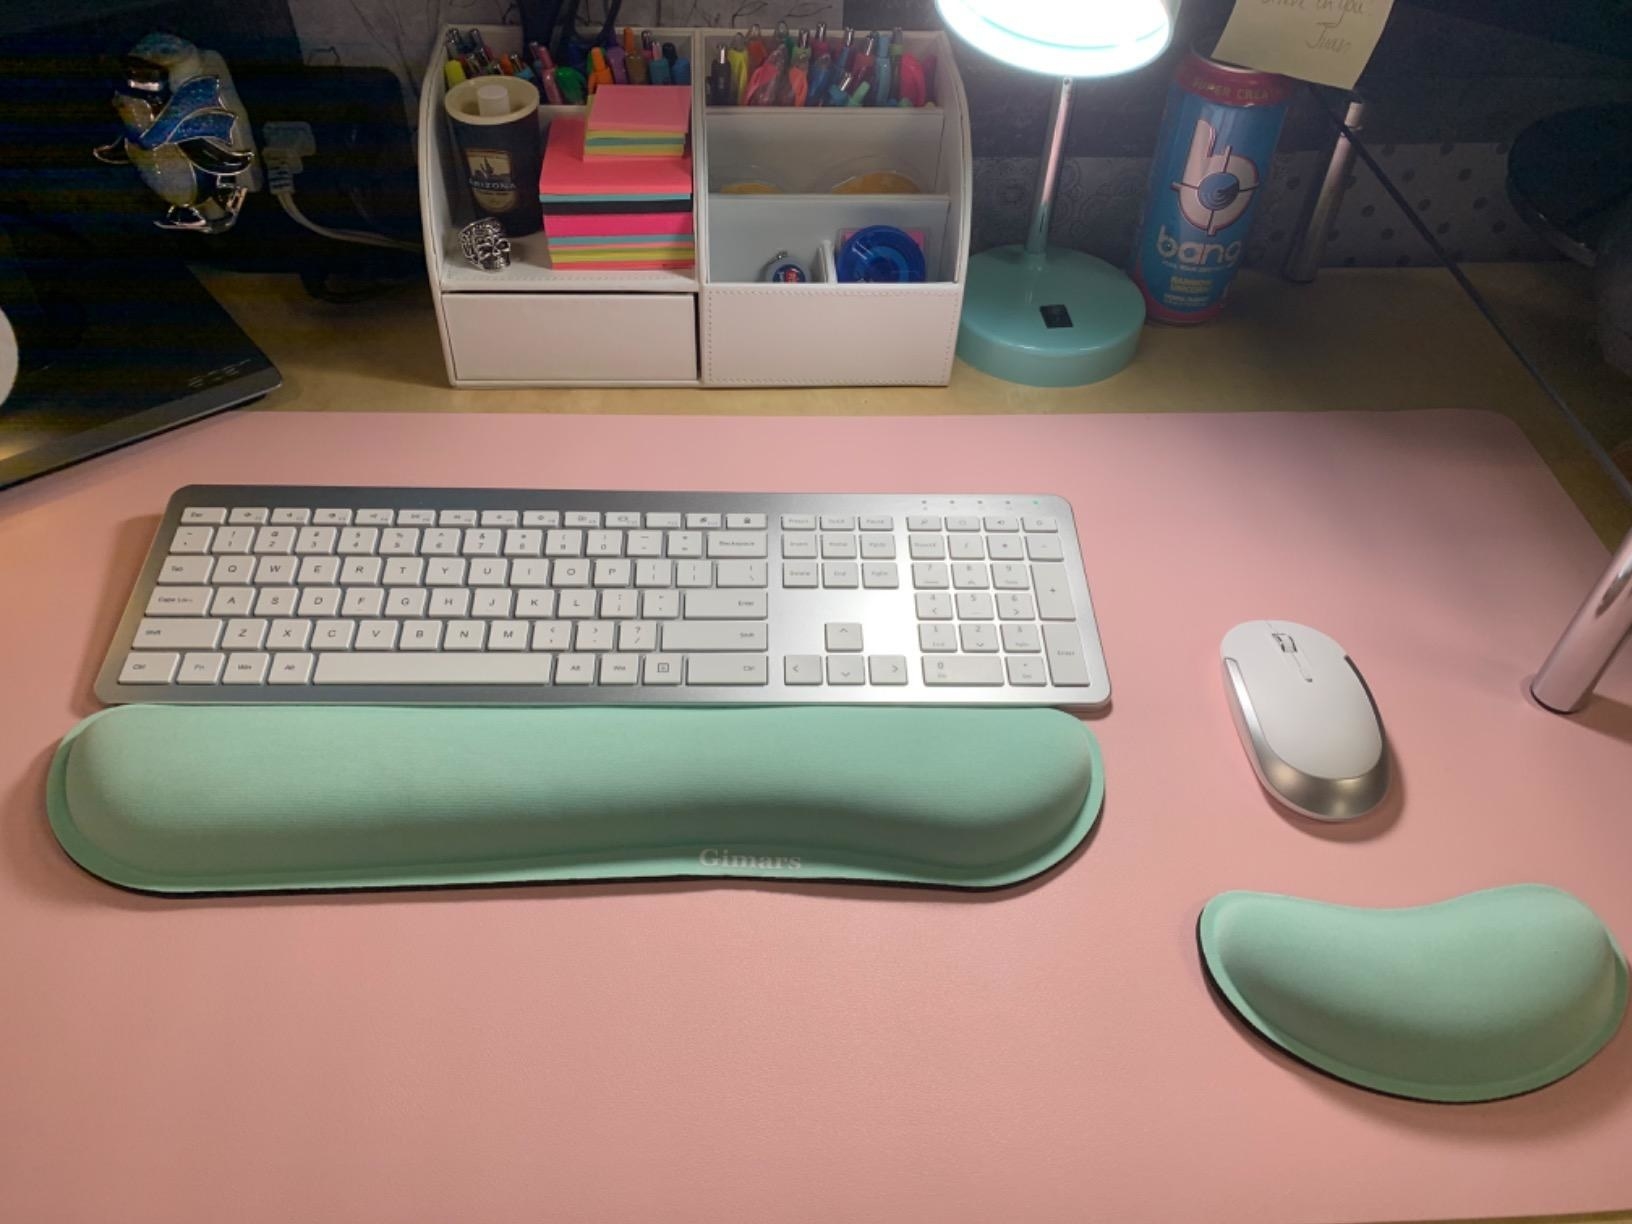 A reviewer&#x27;s computer set up with the mint green keyboard and mouse wrist support pads